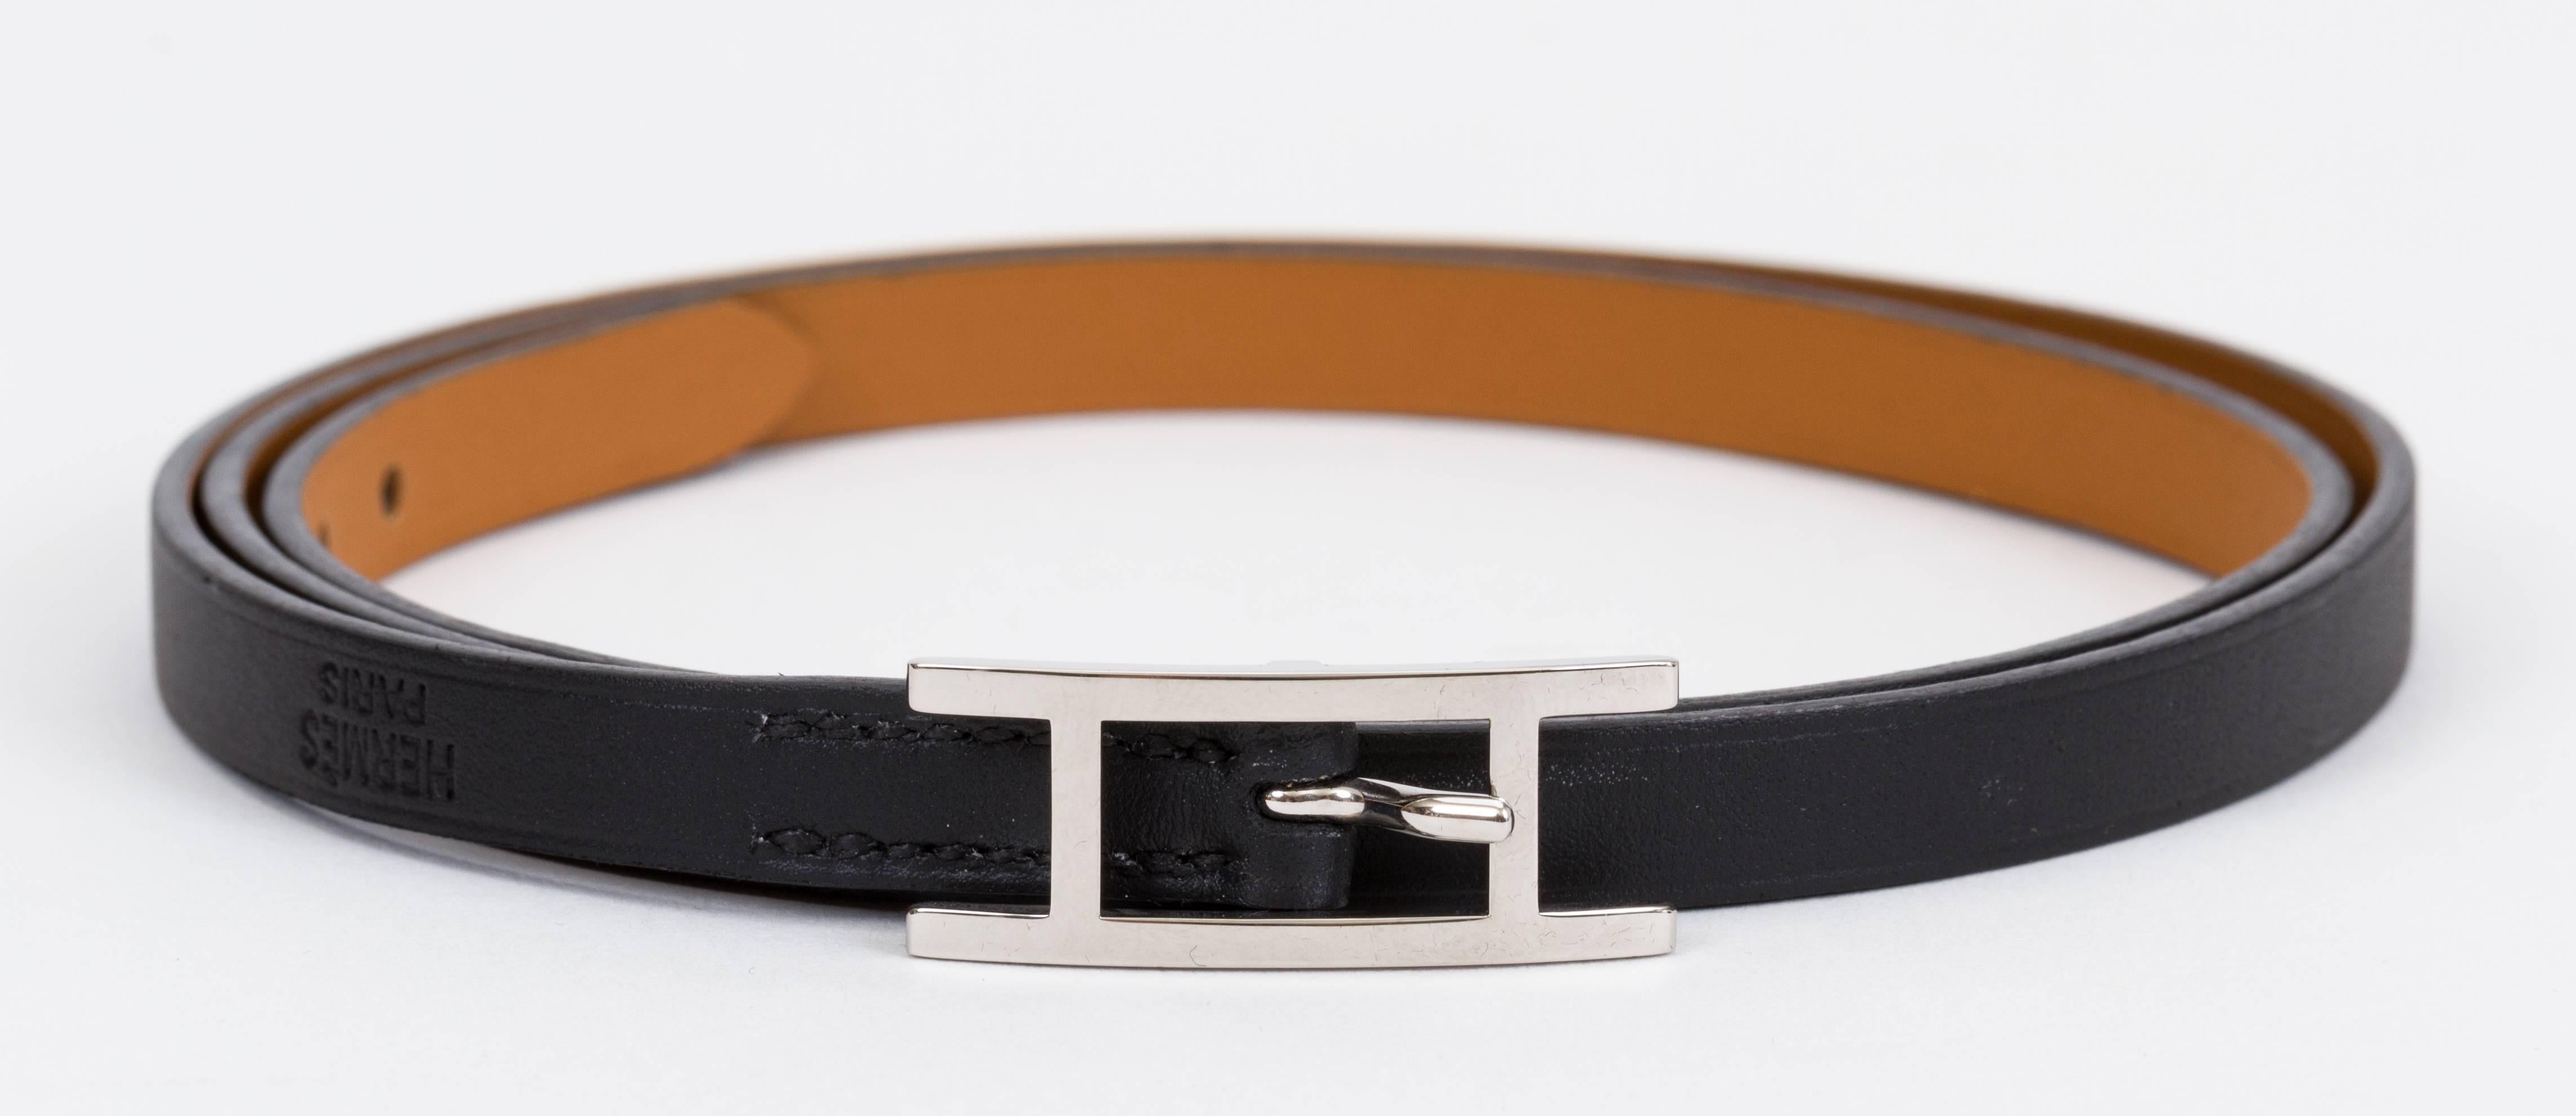 Hermes versatile long double sided leather bracelet, black and gold with palladium clasp. Size medium can be wrapped up to 4 times. Brand new comes with box and ribbon.
